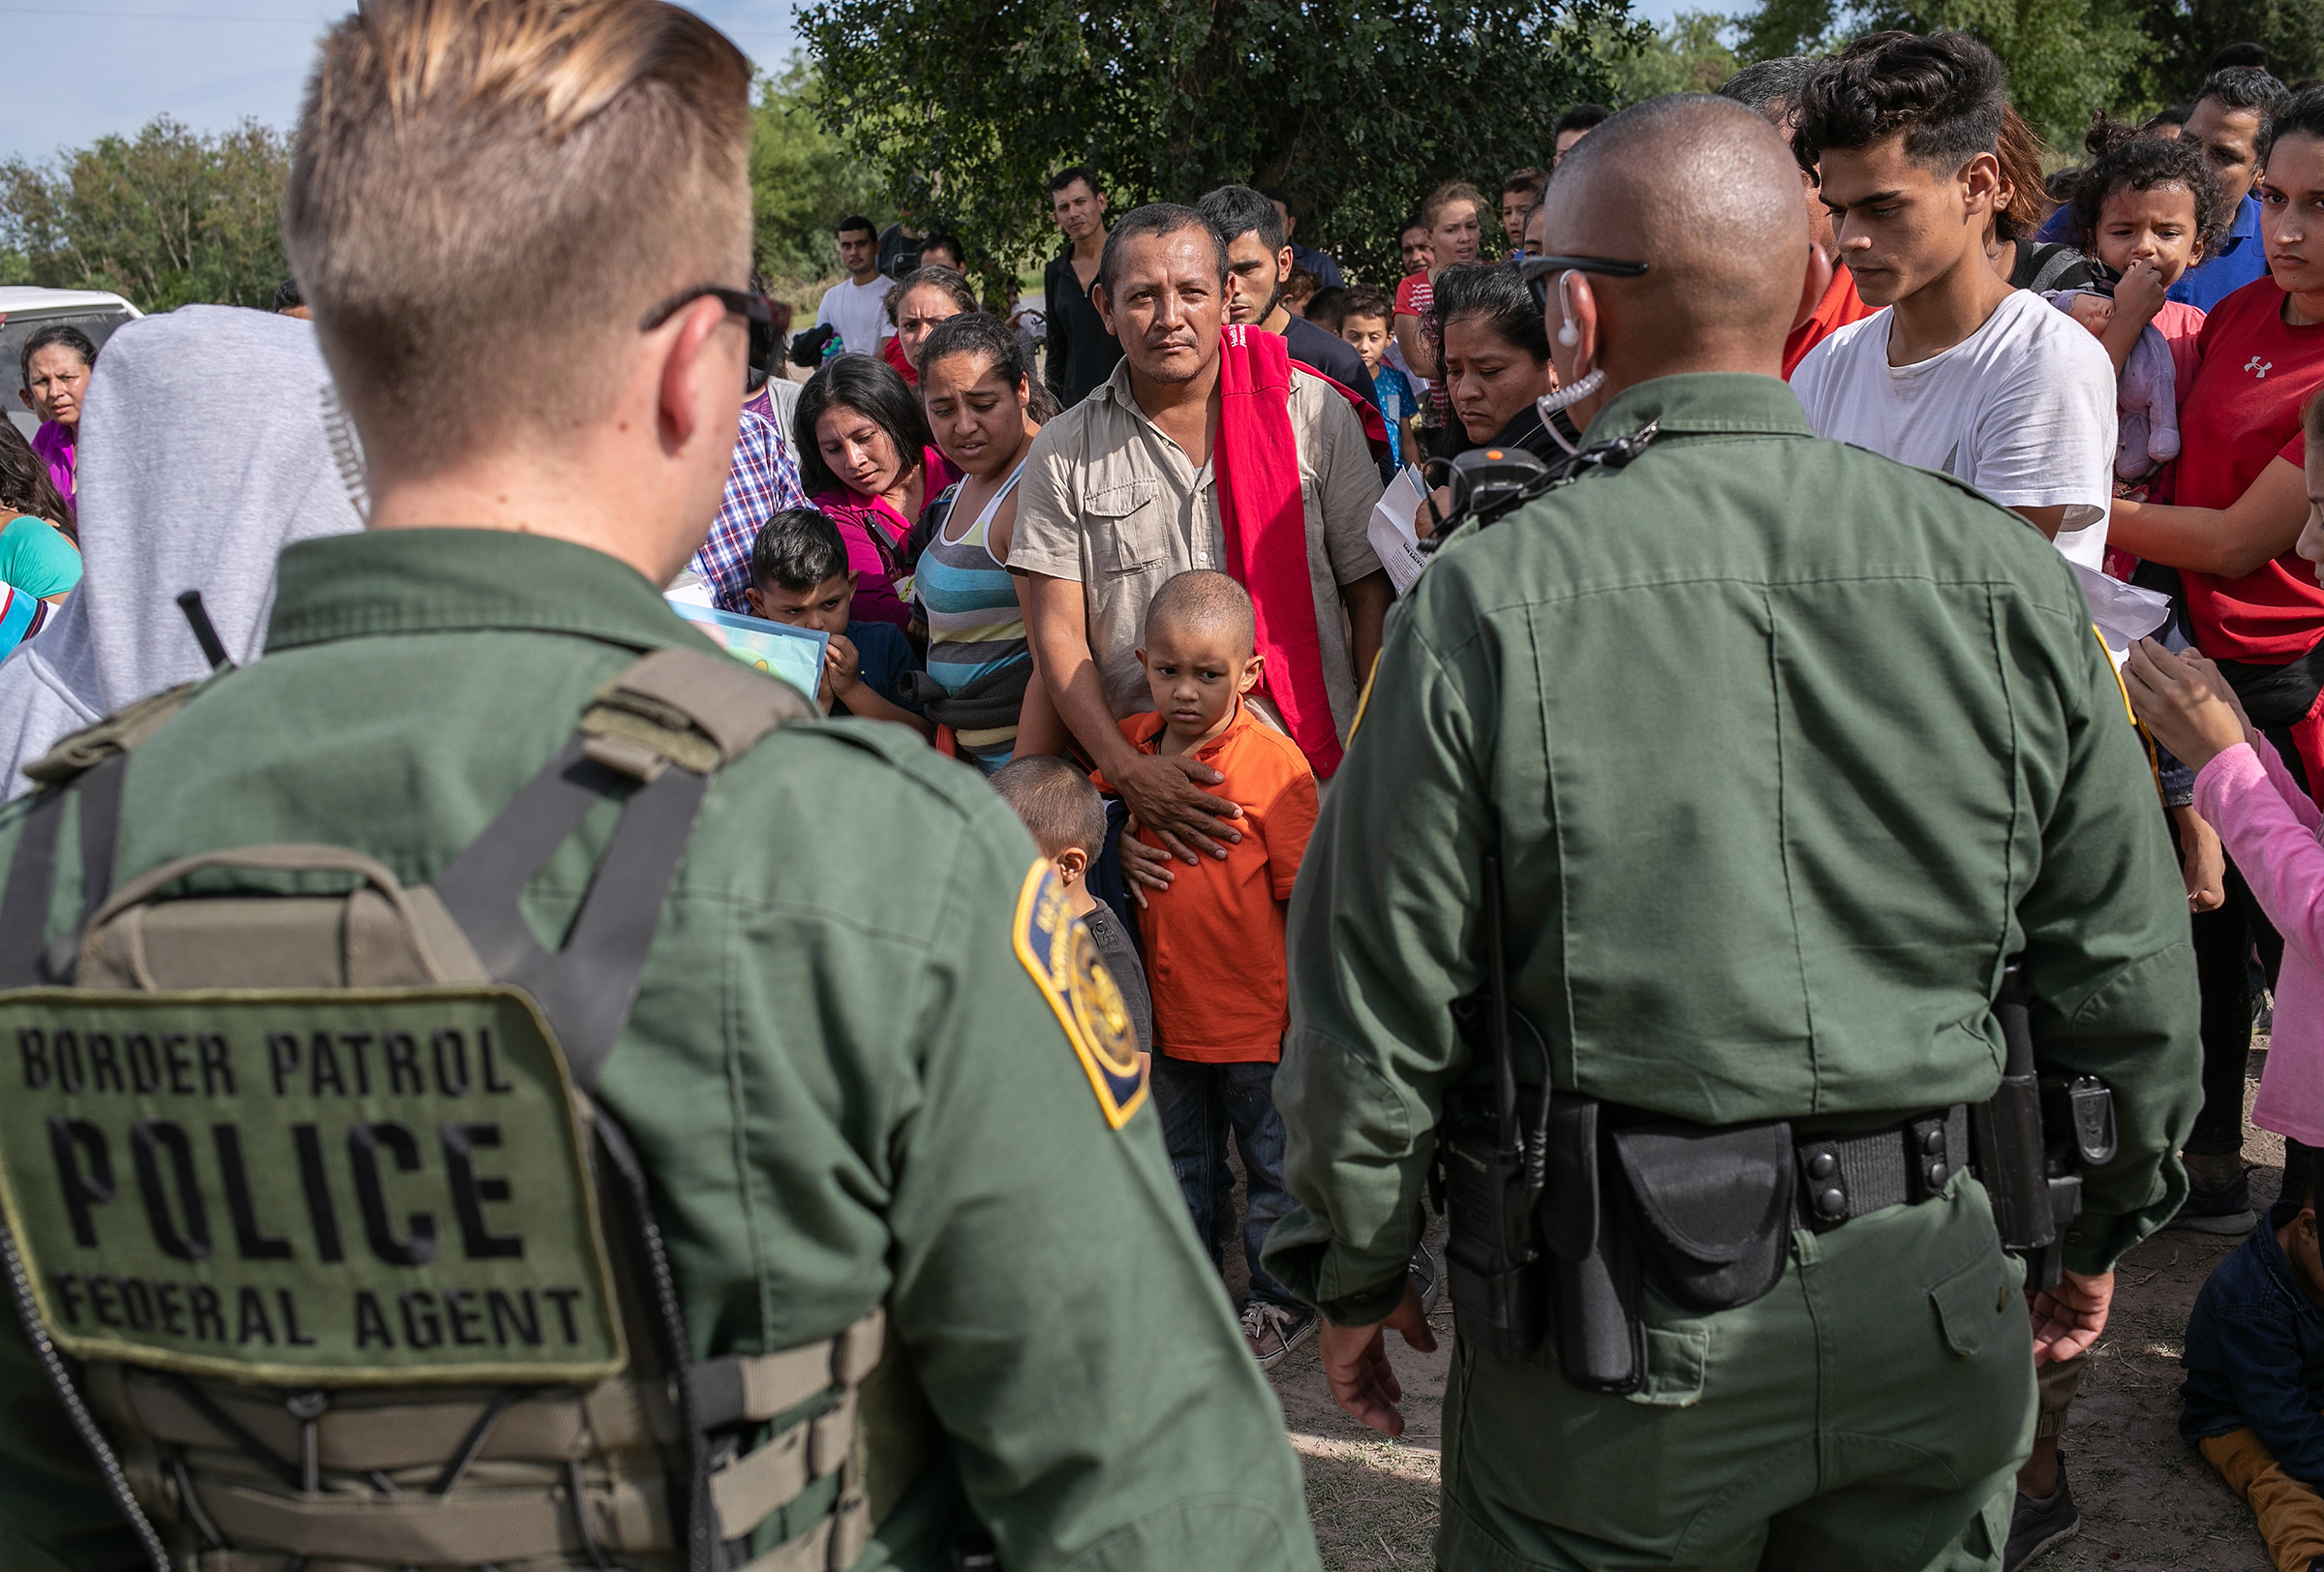 U.S. Border Patrol agents watch over immigrants after taking them into custody on July 02, 2019 in Los Ebanos, Texas.